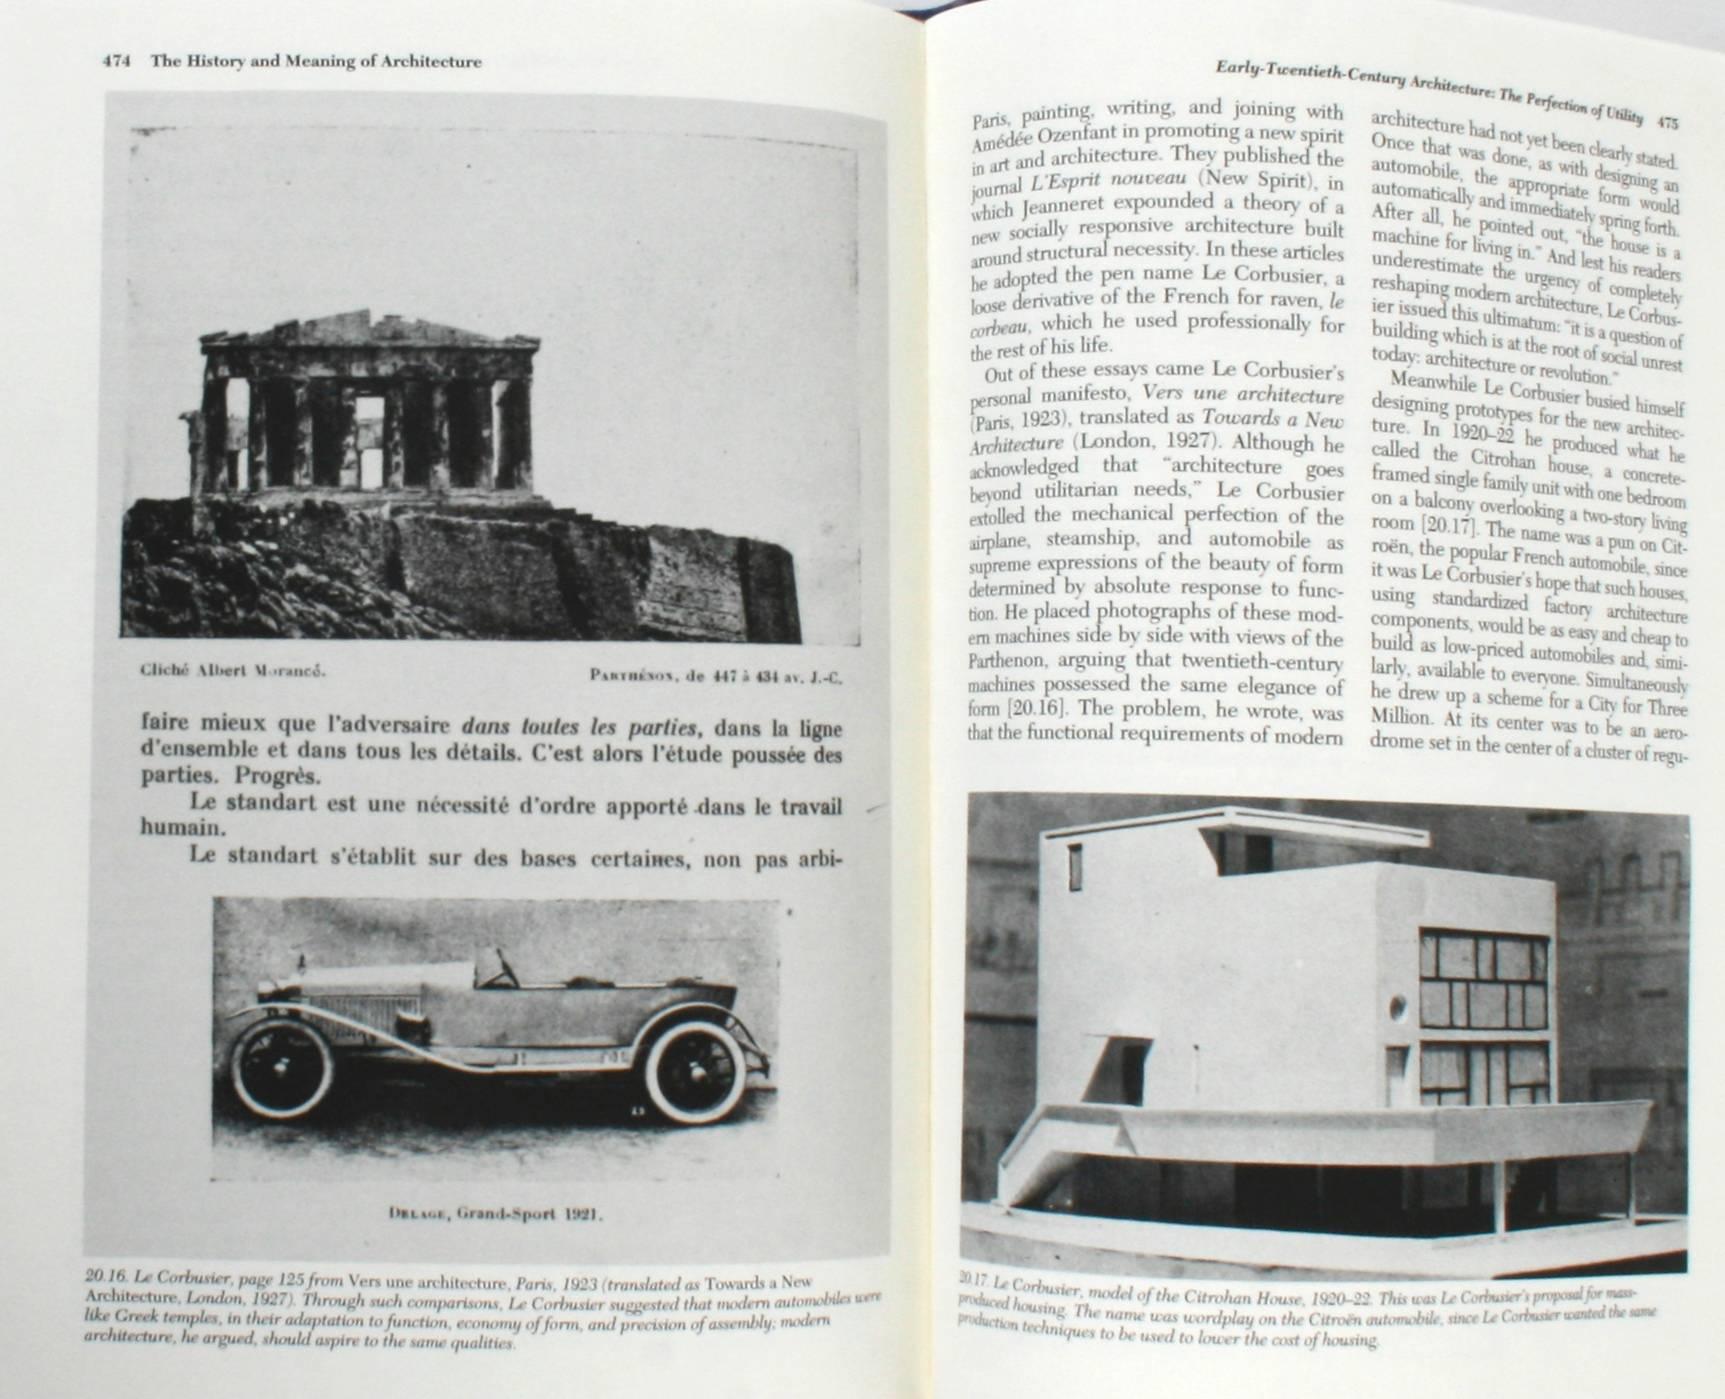 20th Century Understanding Architecture, It's Elements, History and Meaning, First Edition